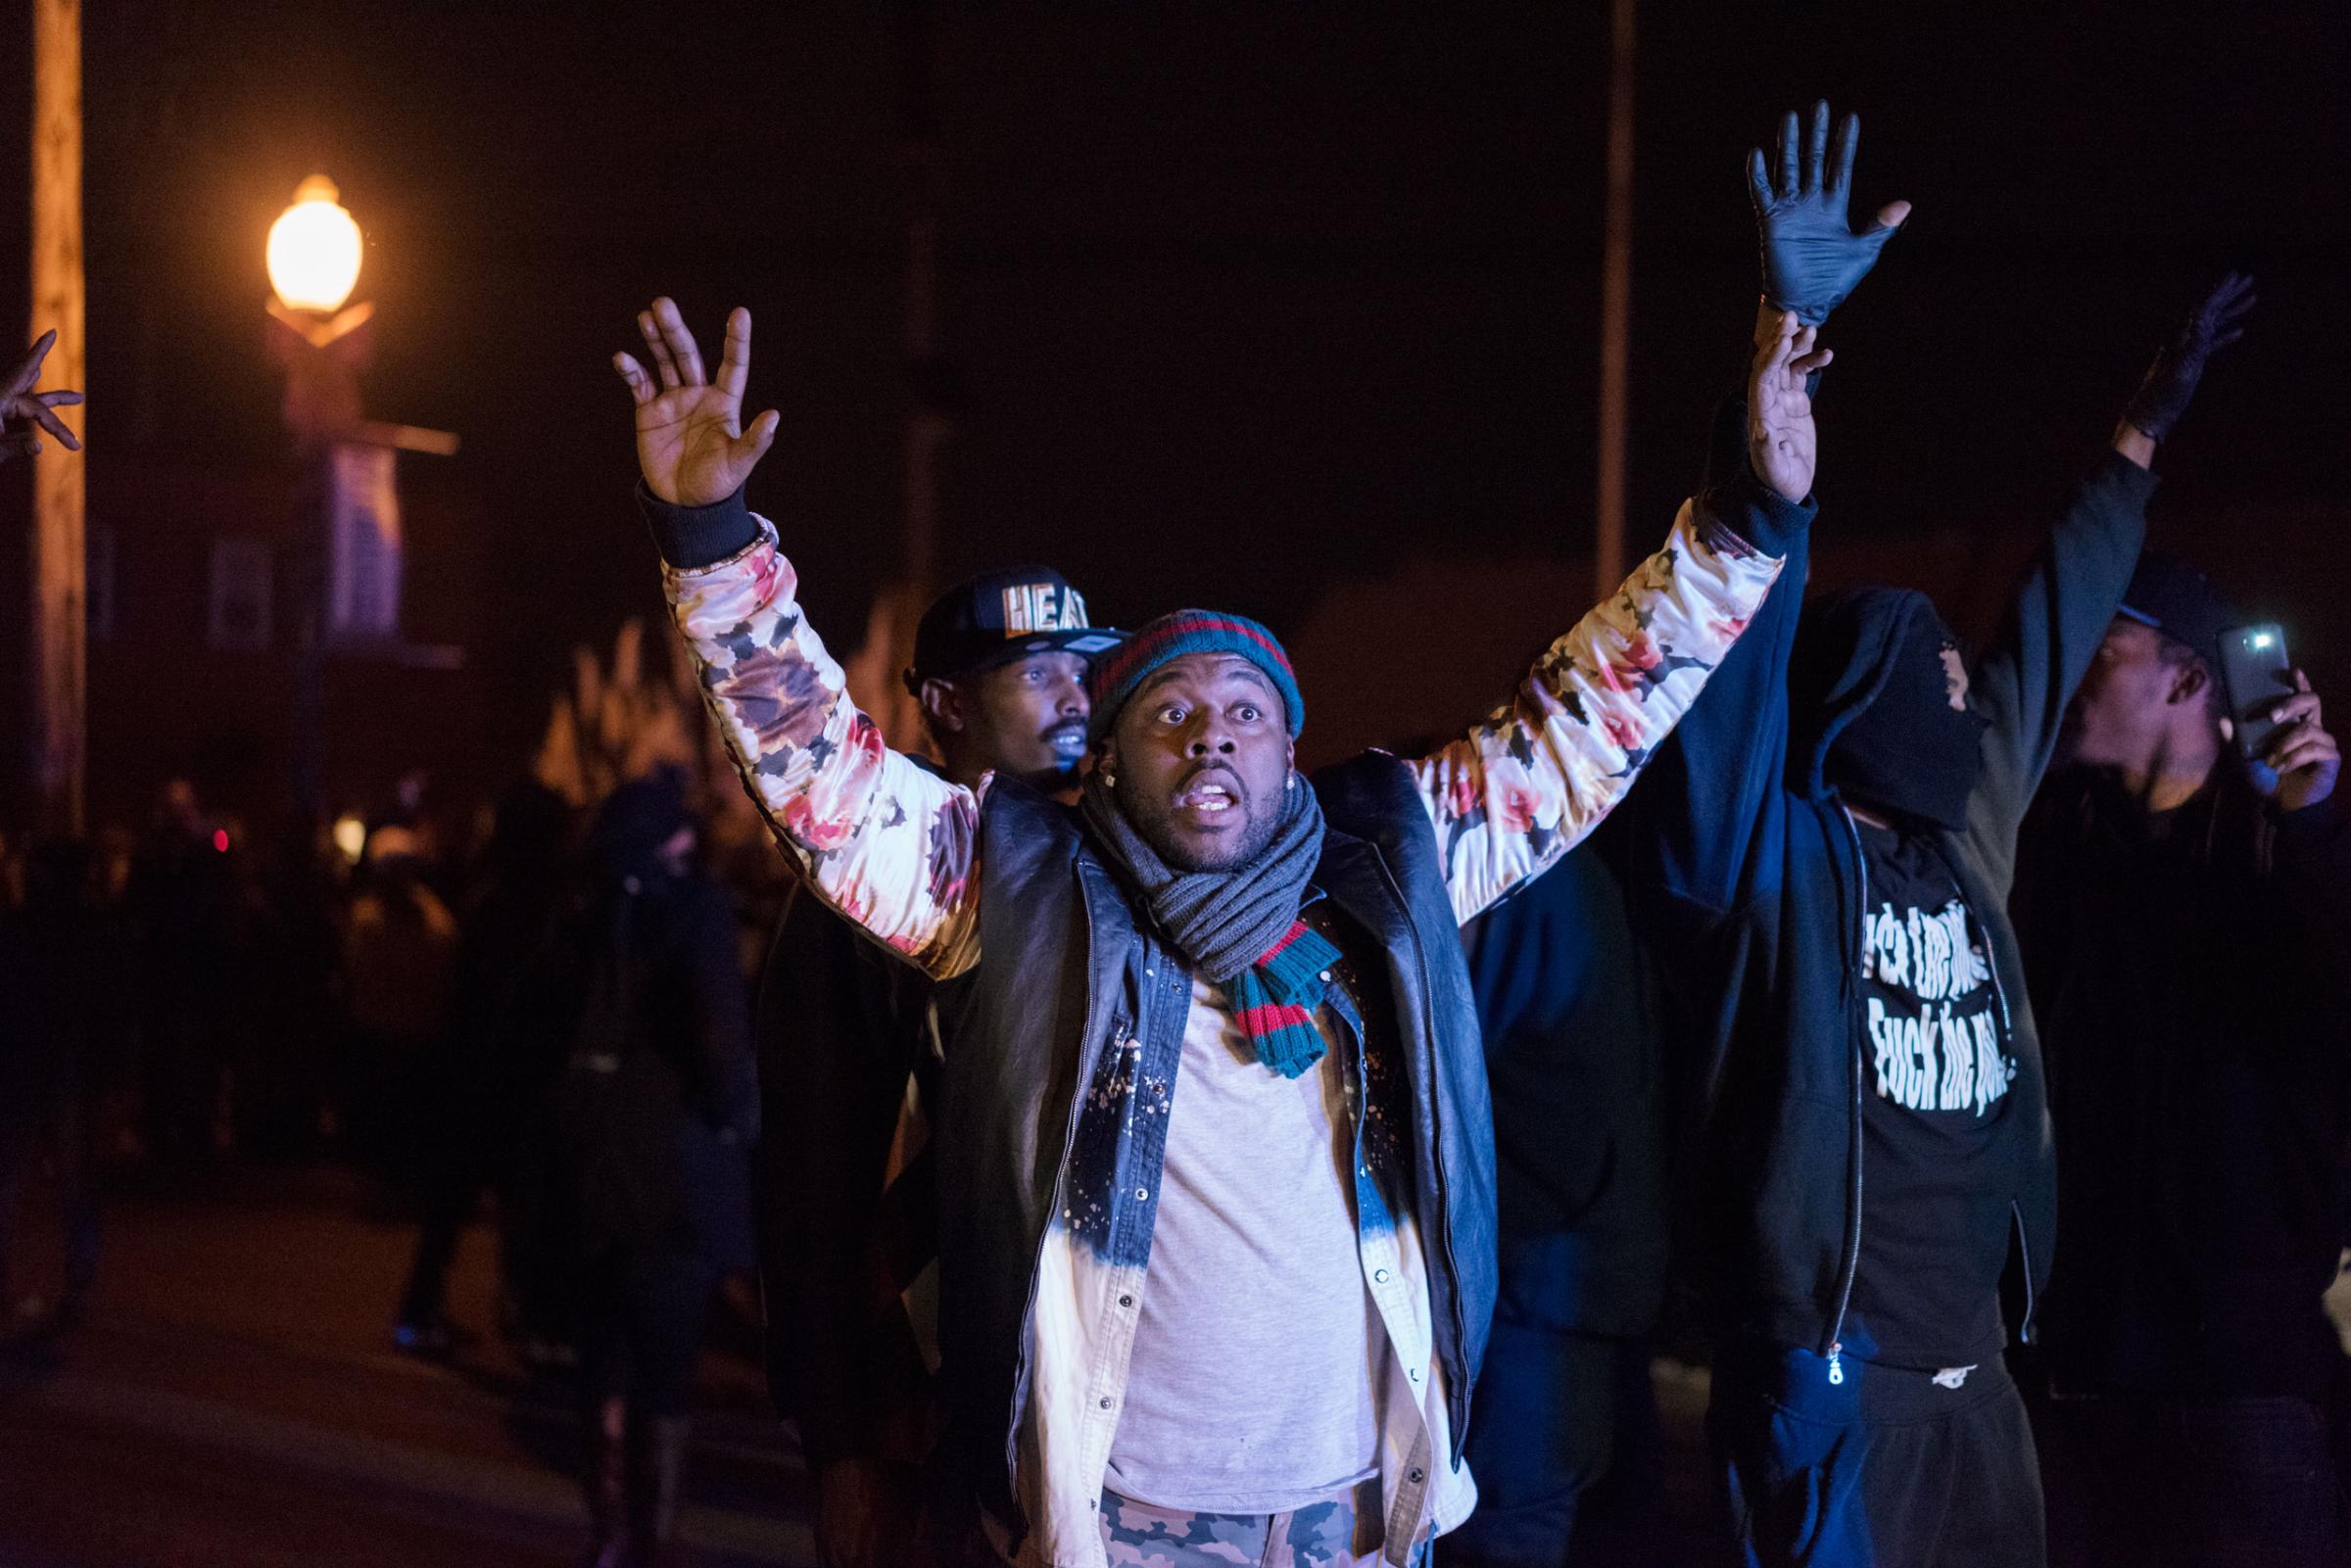 A demonstrator puts his hands in the air amid protests in Ferguson, Mo. on Nov. 24, 2014